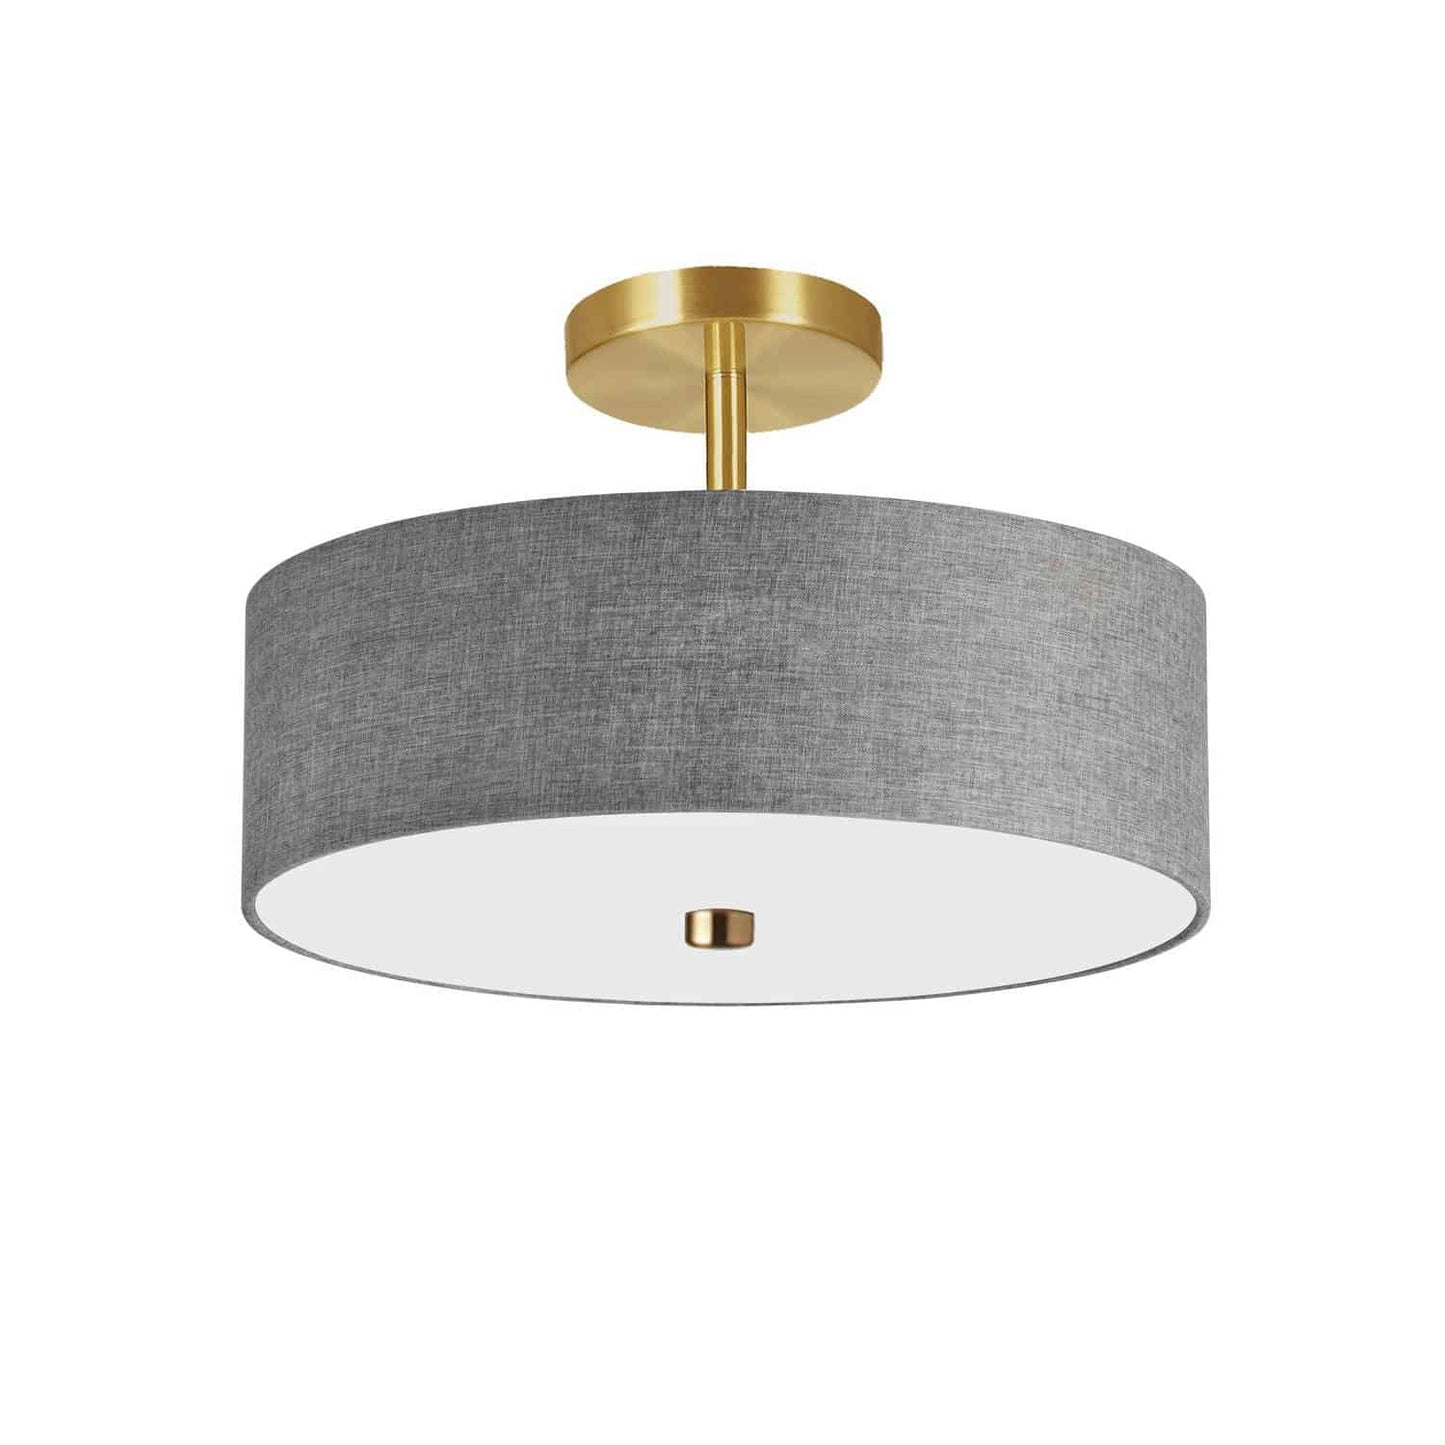 Dainolite 571-143SF-AGB-GRY 3 Light Incandescent Semi-Flush Mount Aged Brass with Grey Shade